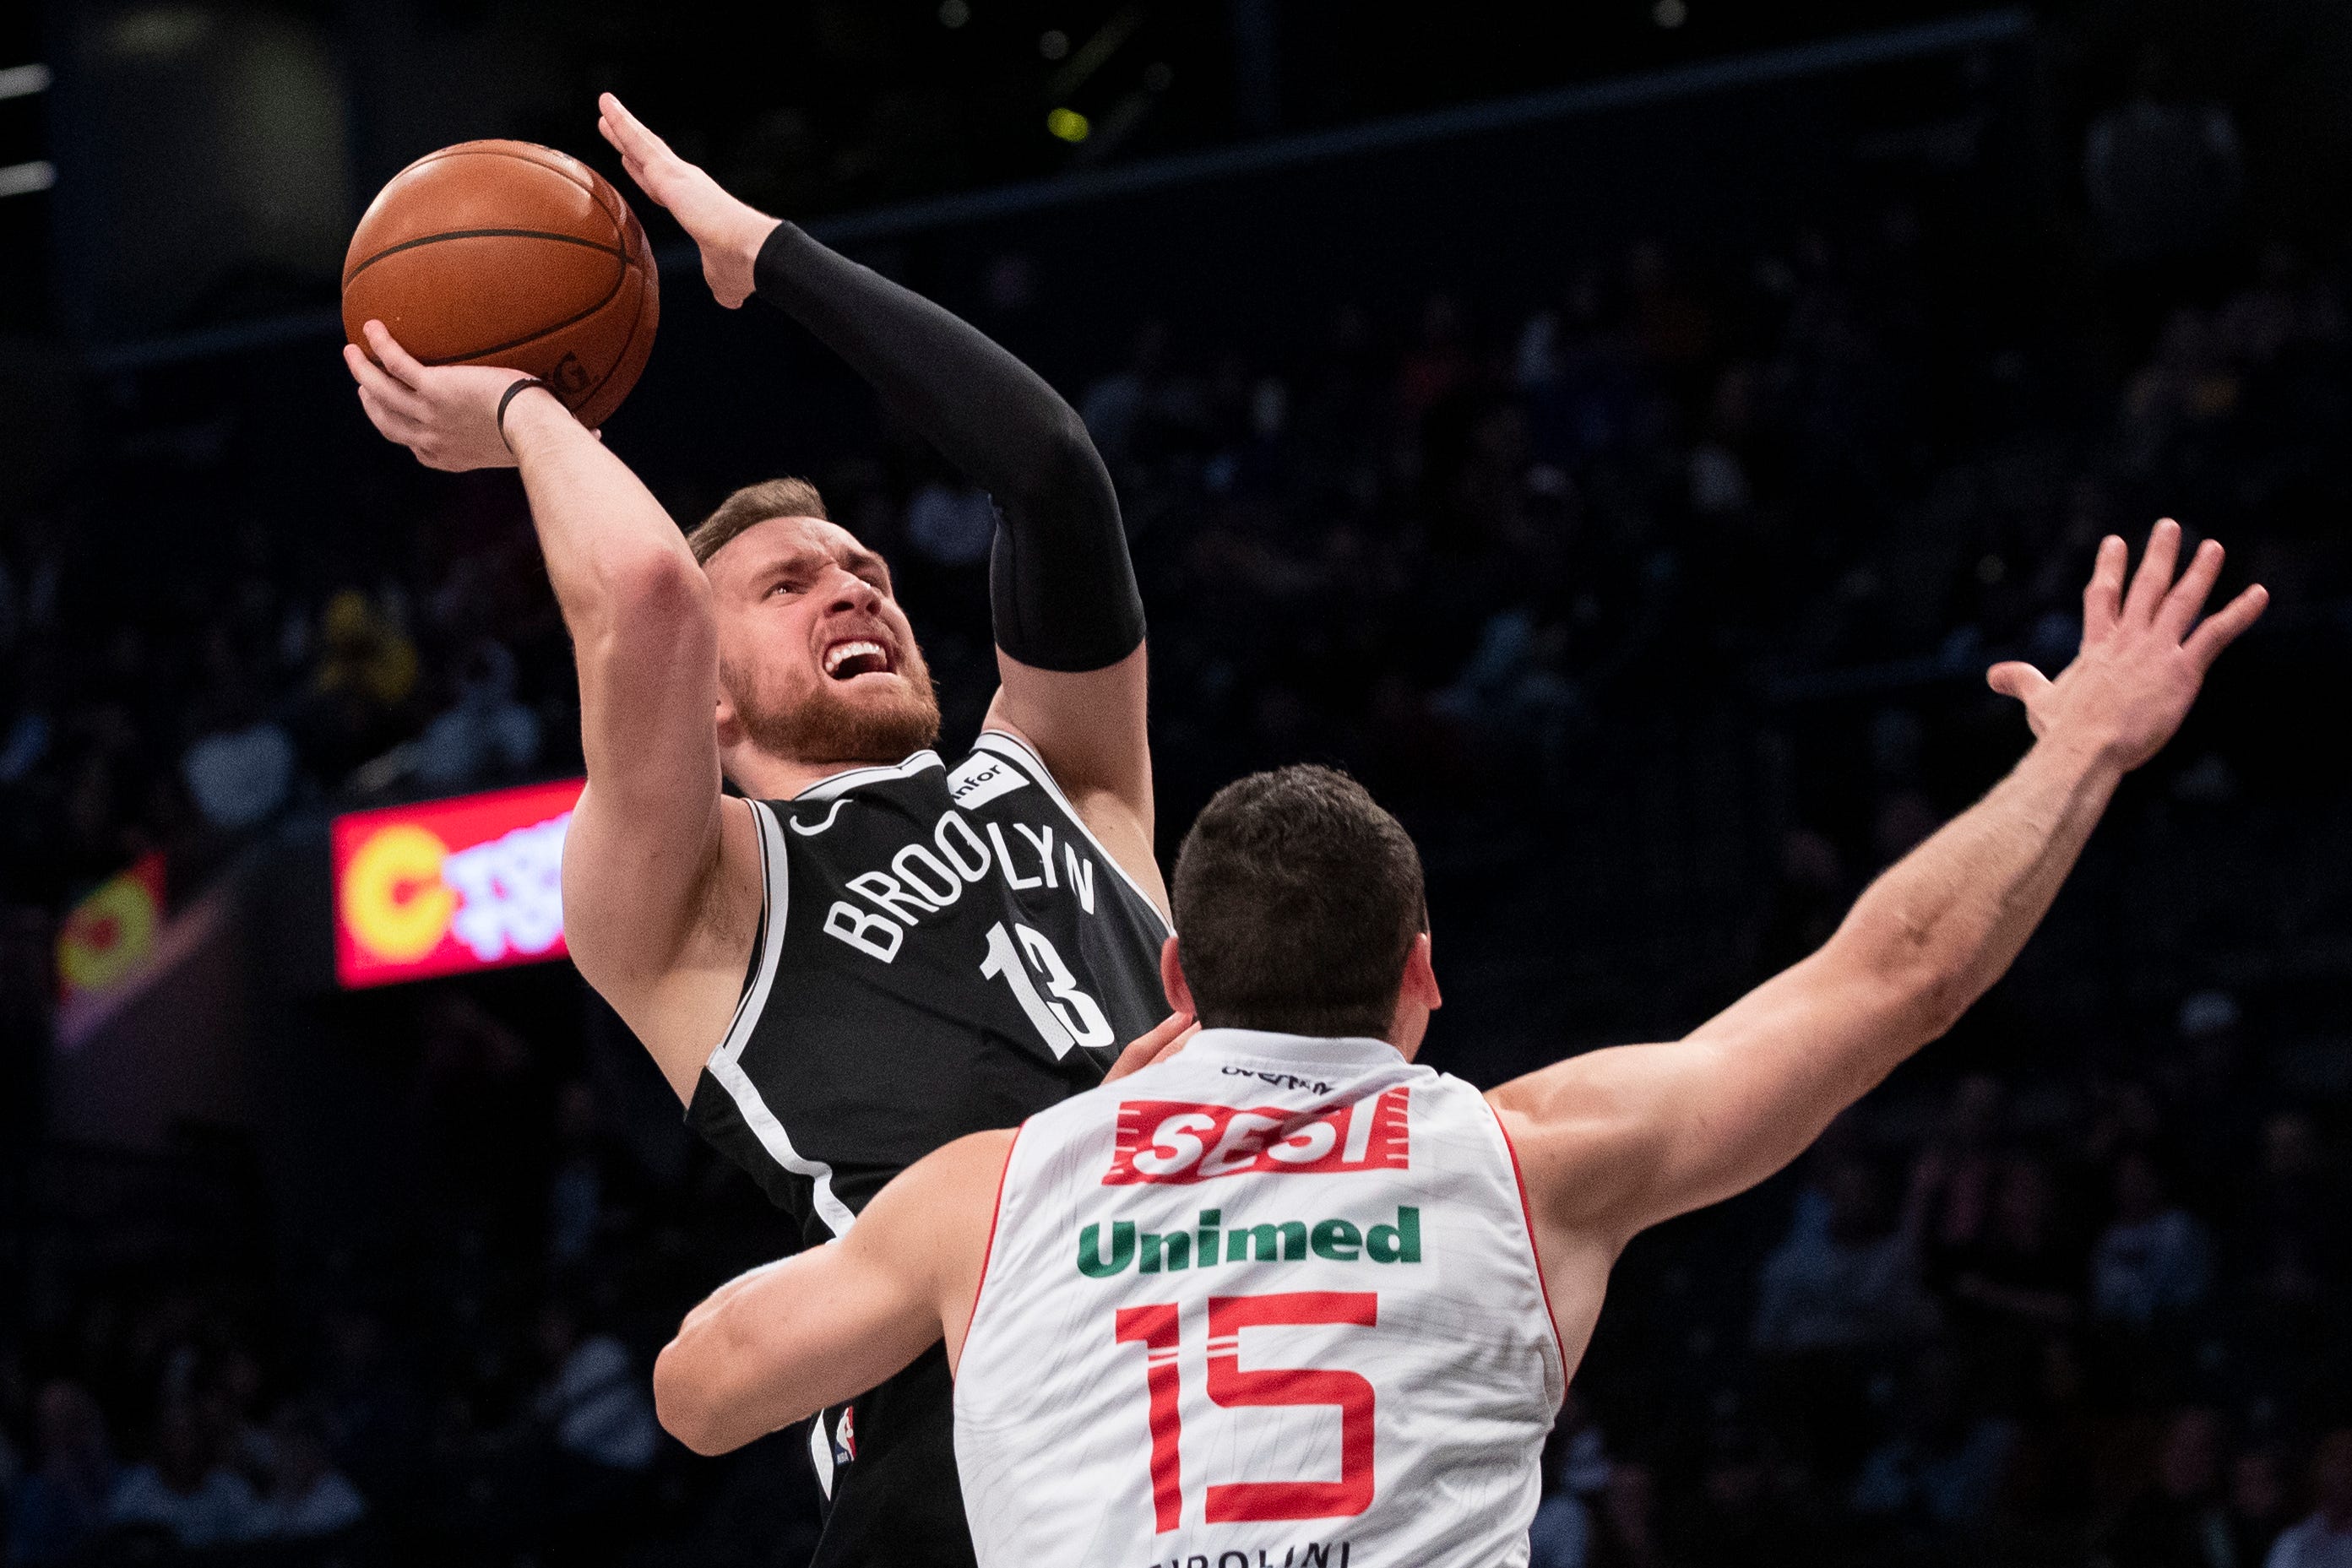 Brooklyn Nets guard Dzanan Musa (13) goes to the basket against Sesi/Franca Basketball Club center Lucas Cipolini Alves (15) during the second half of an exhibition NBA basketball game, Friday, Oct. 4, 2019, in New York.